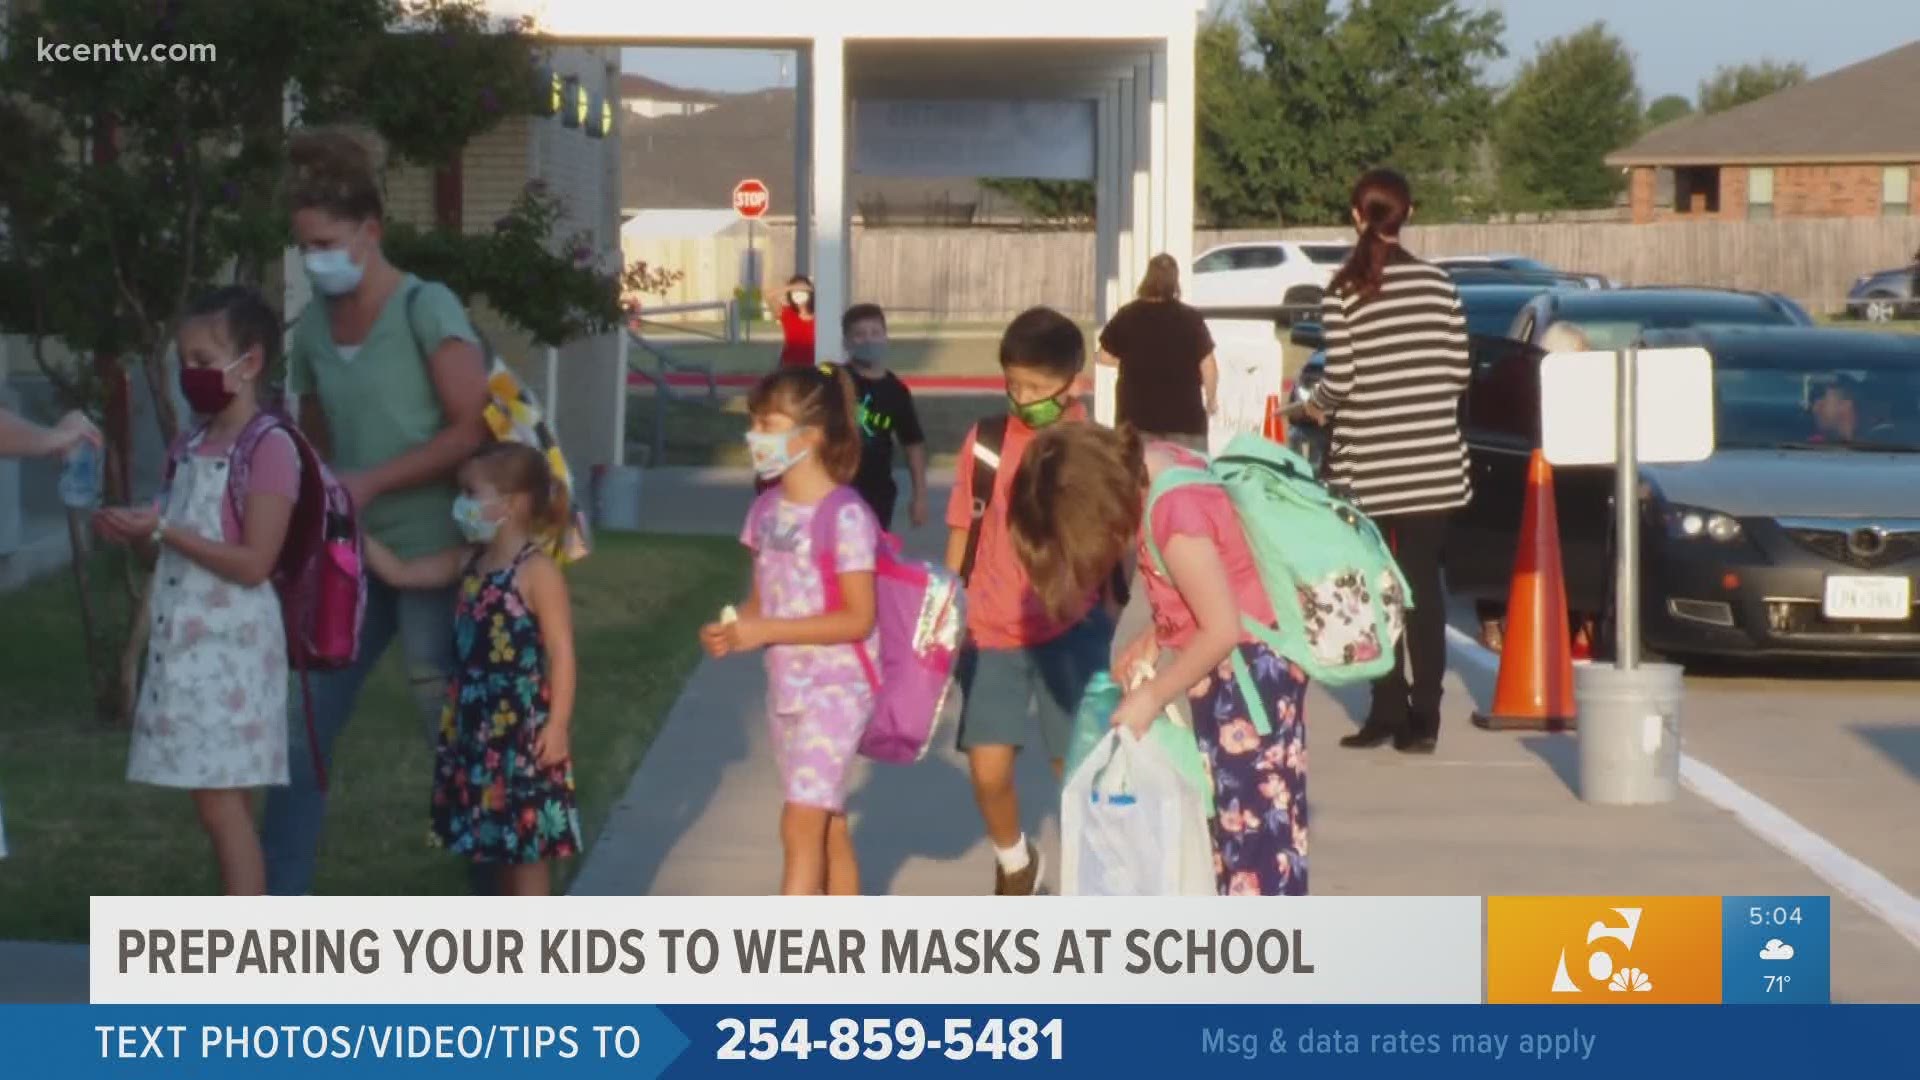 Kids will have to wear masks for several hours while they're at school. A child therapist has advice on preparing them for the new year.